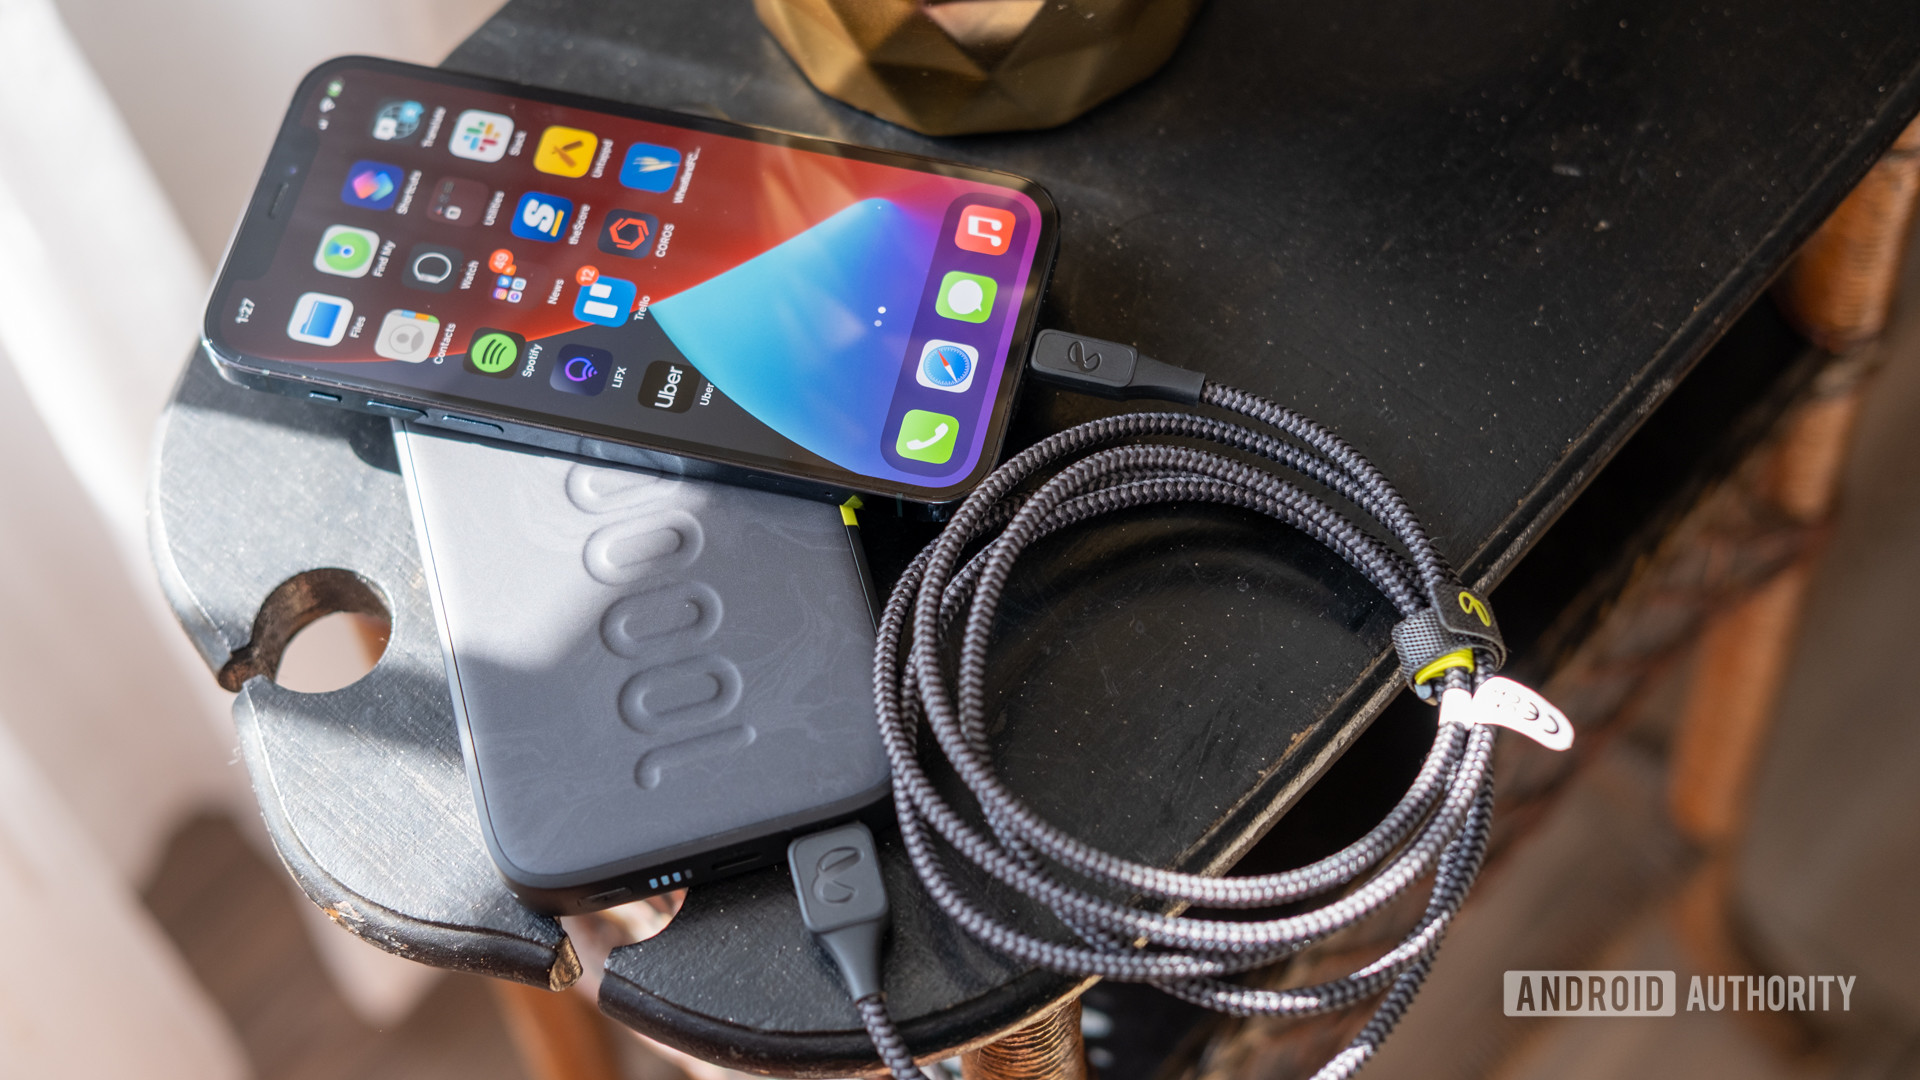 The InfinityLab InstantGo power bank charging an iPhone 12 Pro